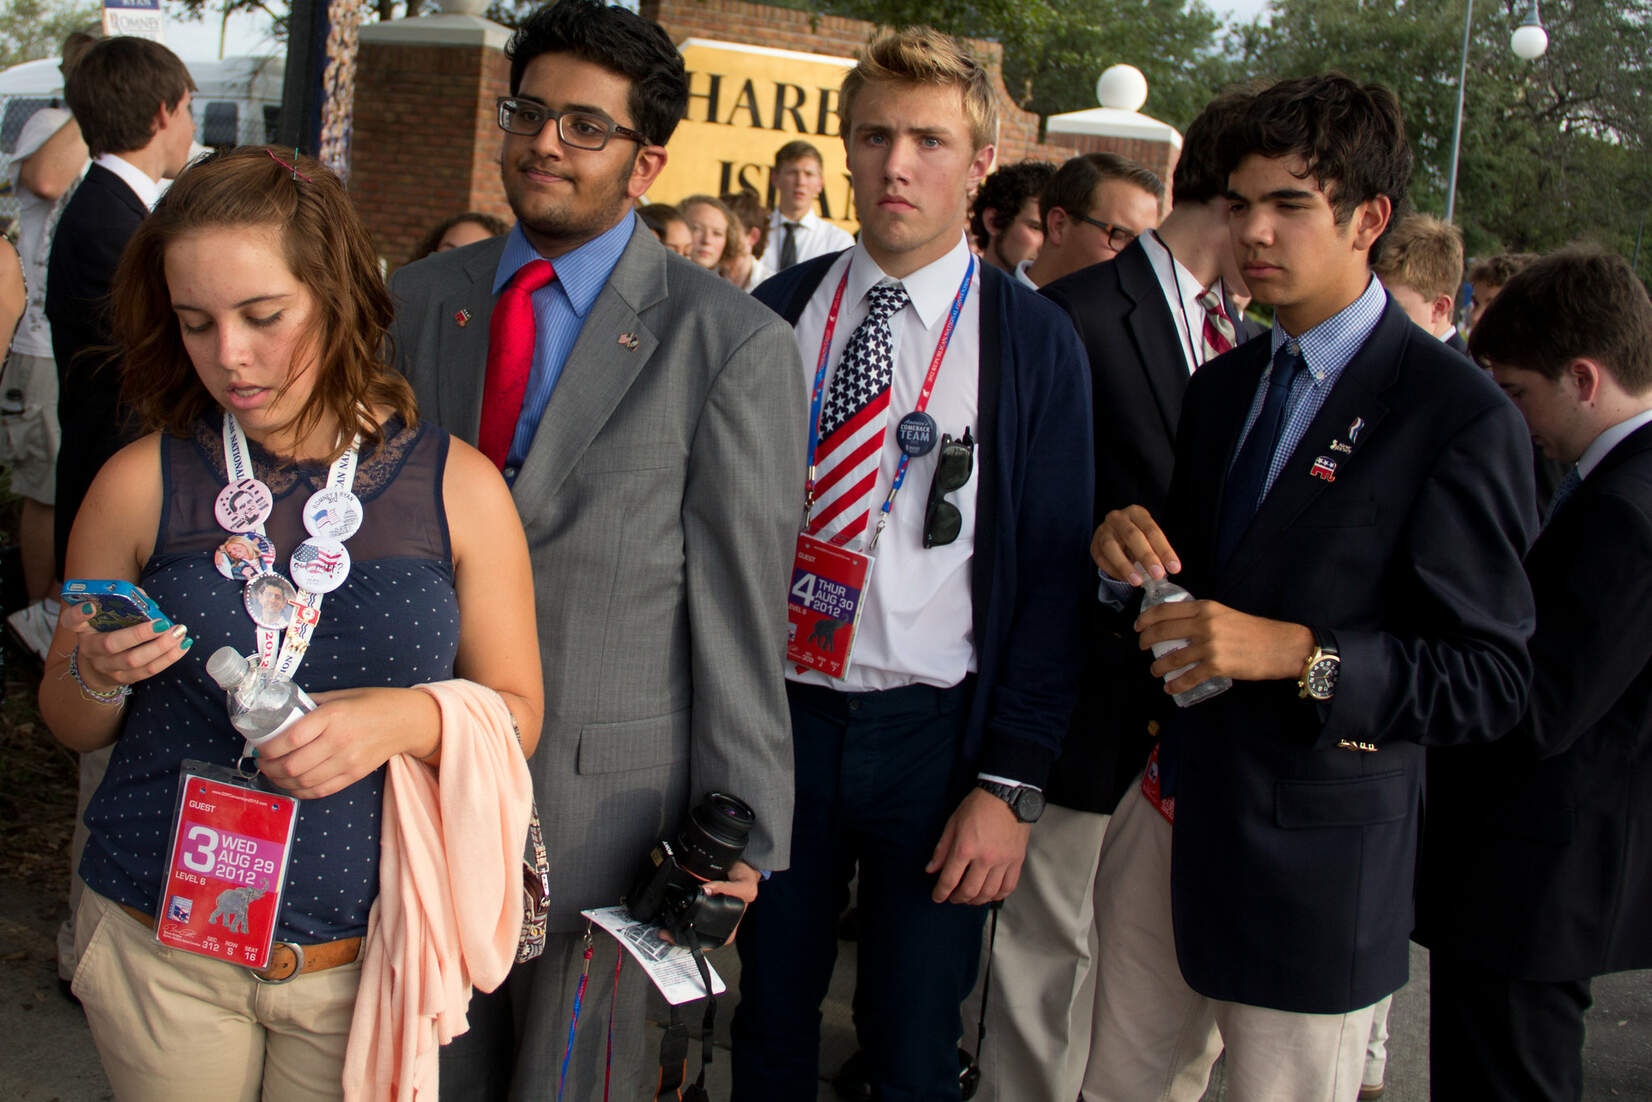 College Republicans at the University of Louisville